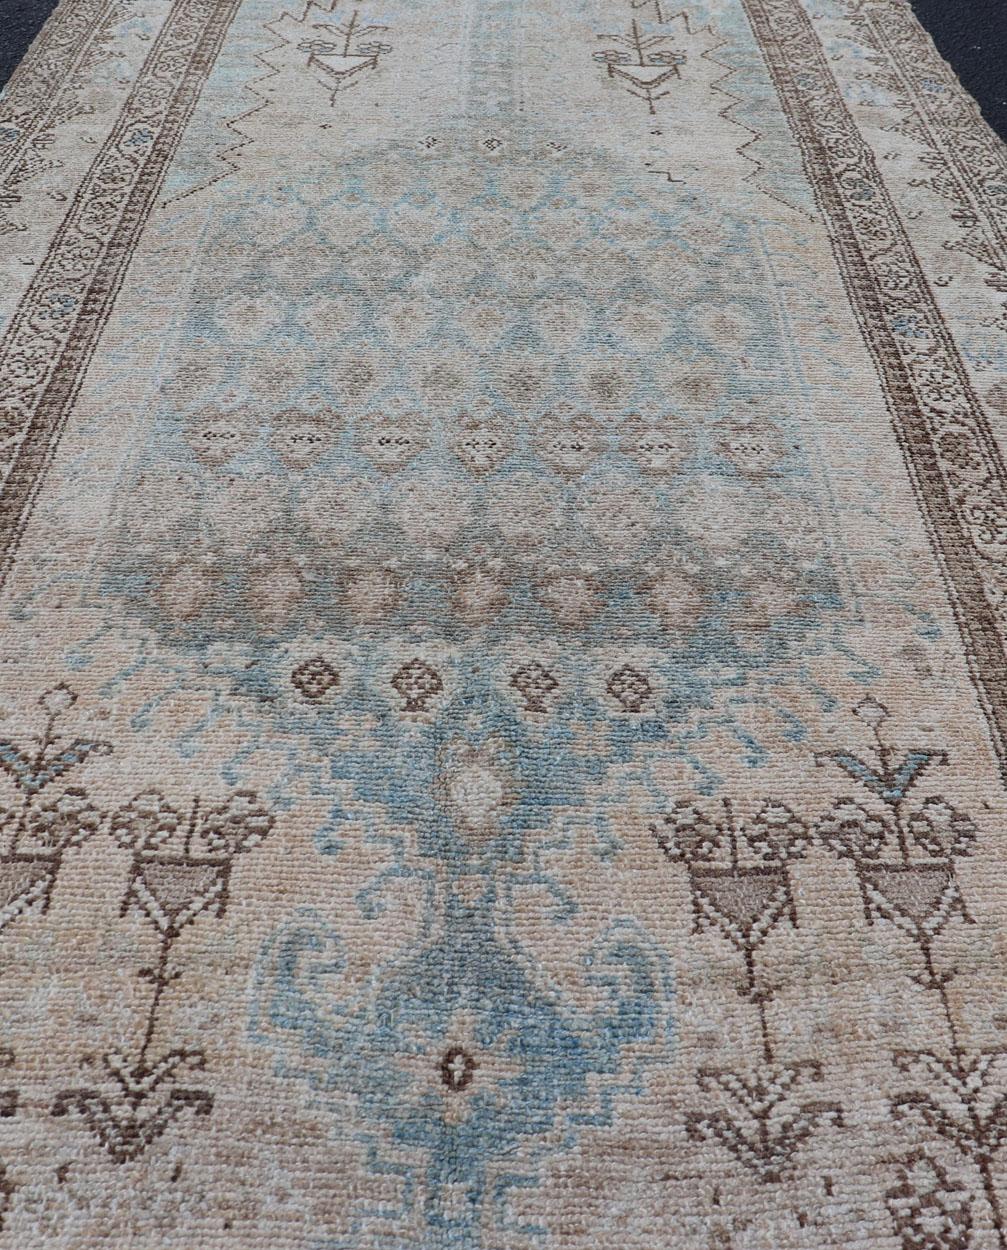 Antique Hand-Knotted Persian Malayer with Large Sub-Geometric Medallion Design For Sale 4